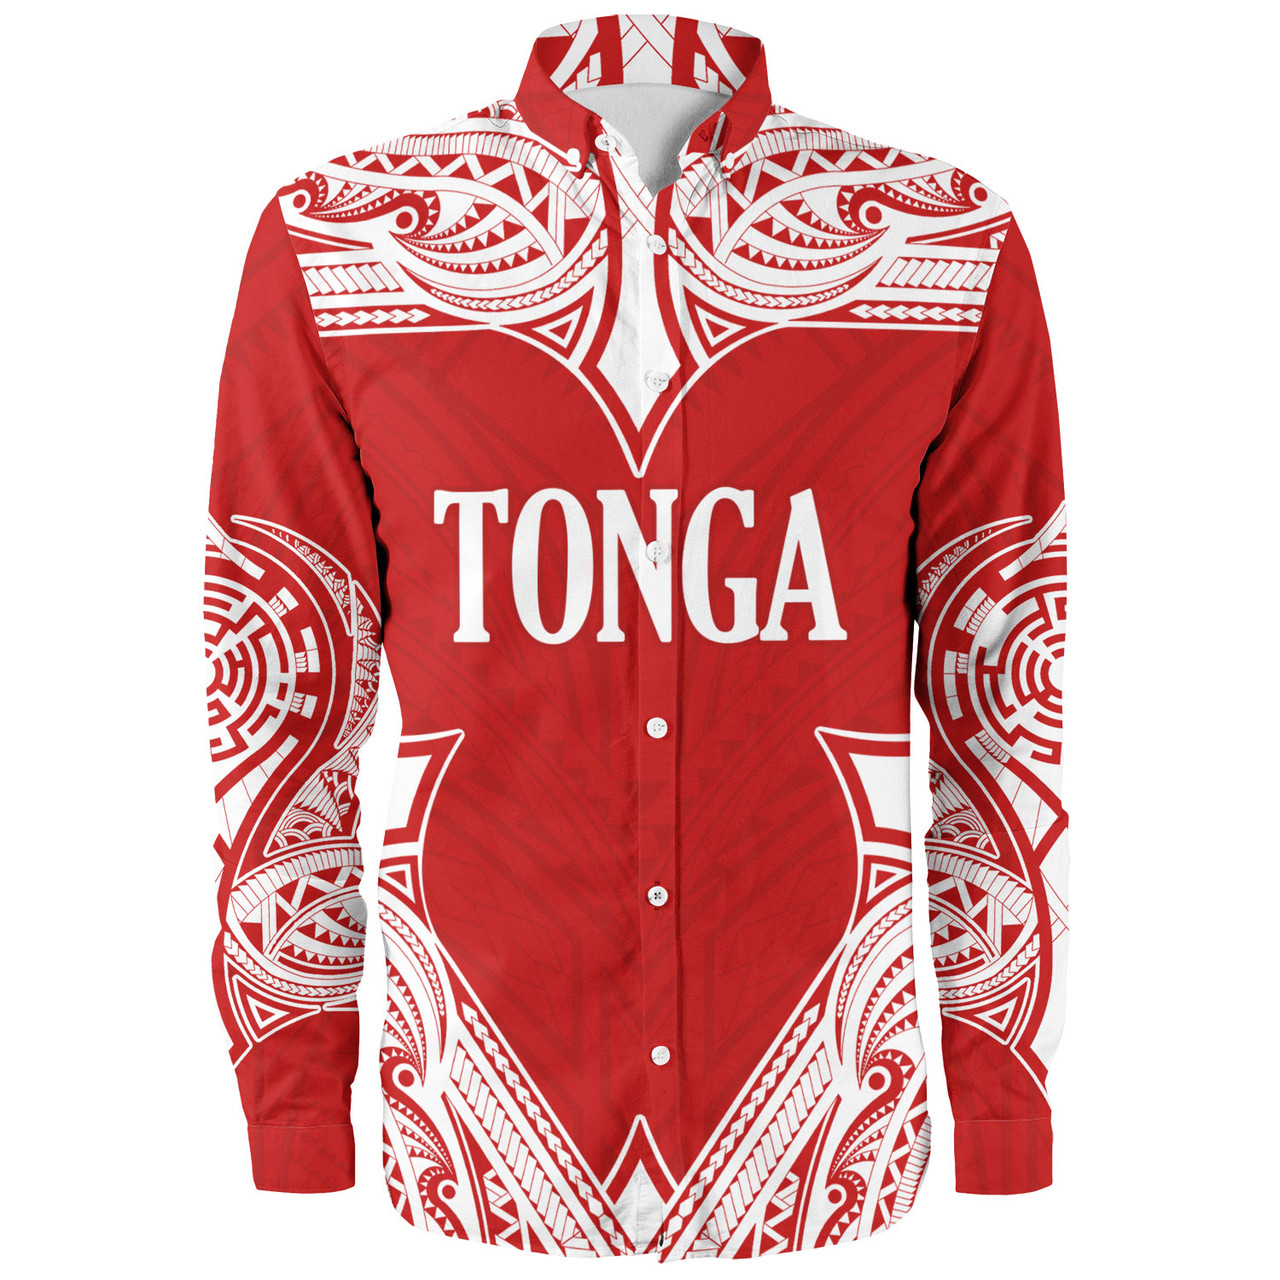 Tonga Long Sleeve Shirt - Custom Coat Of Arms With Patterns Flag Color